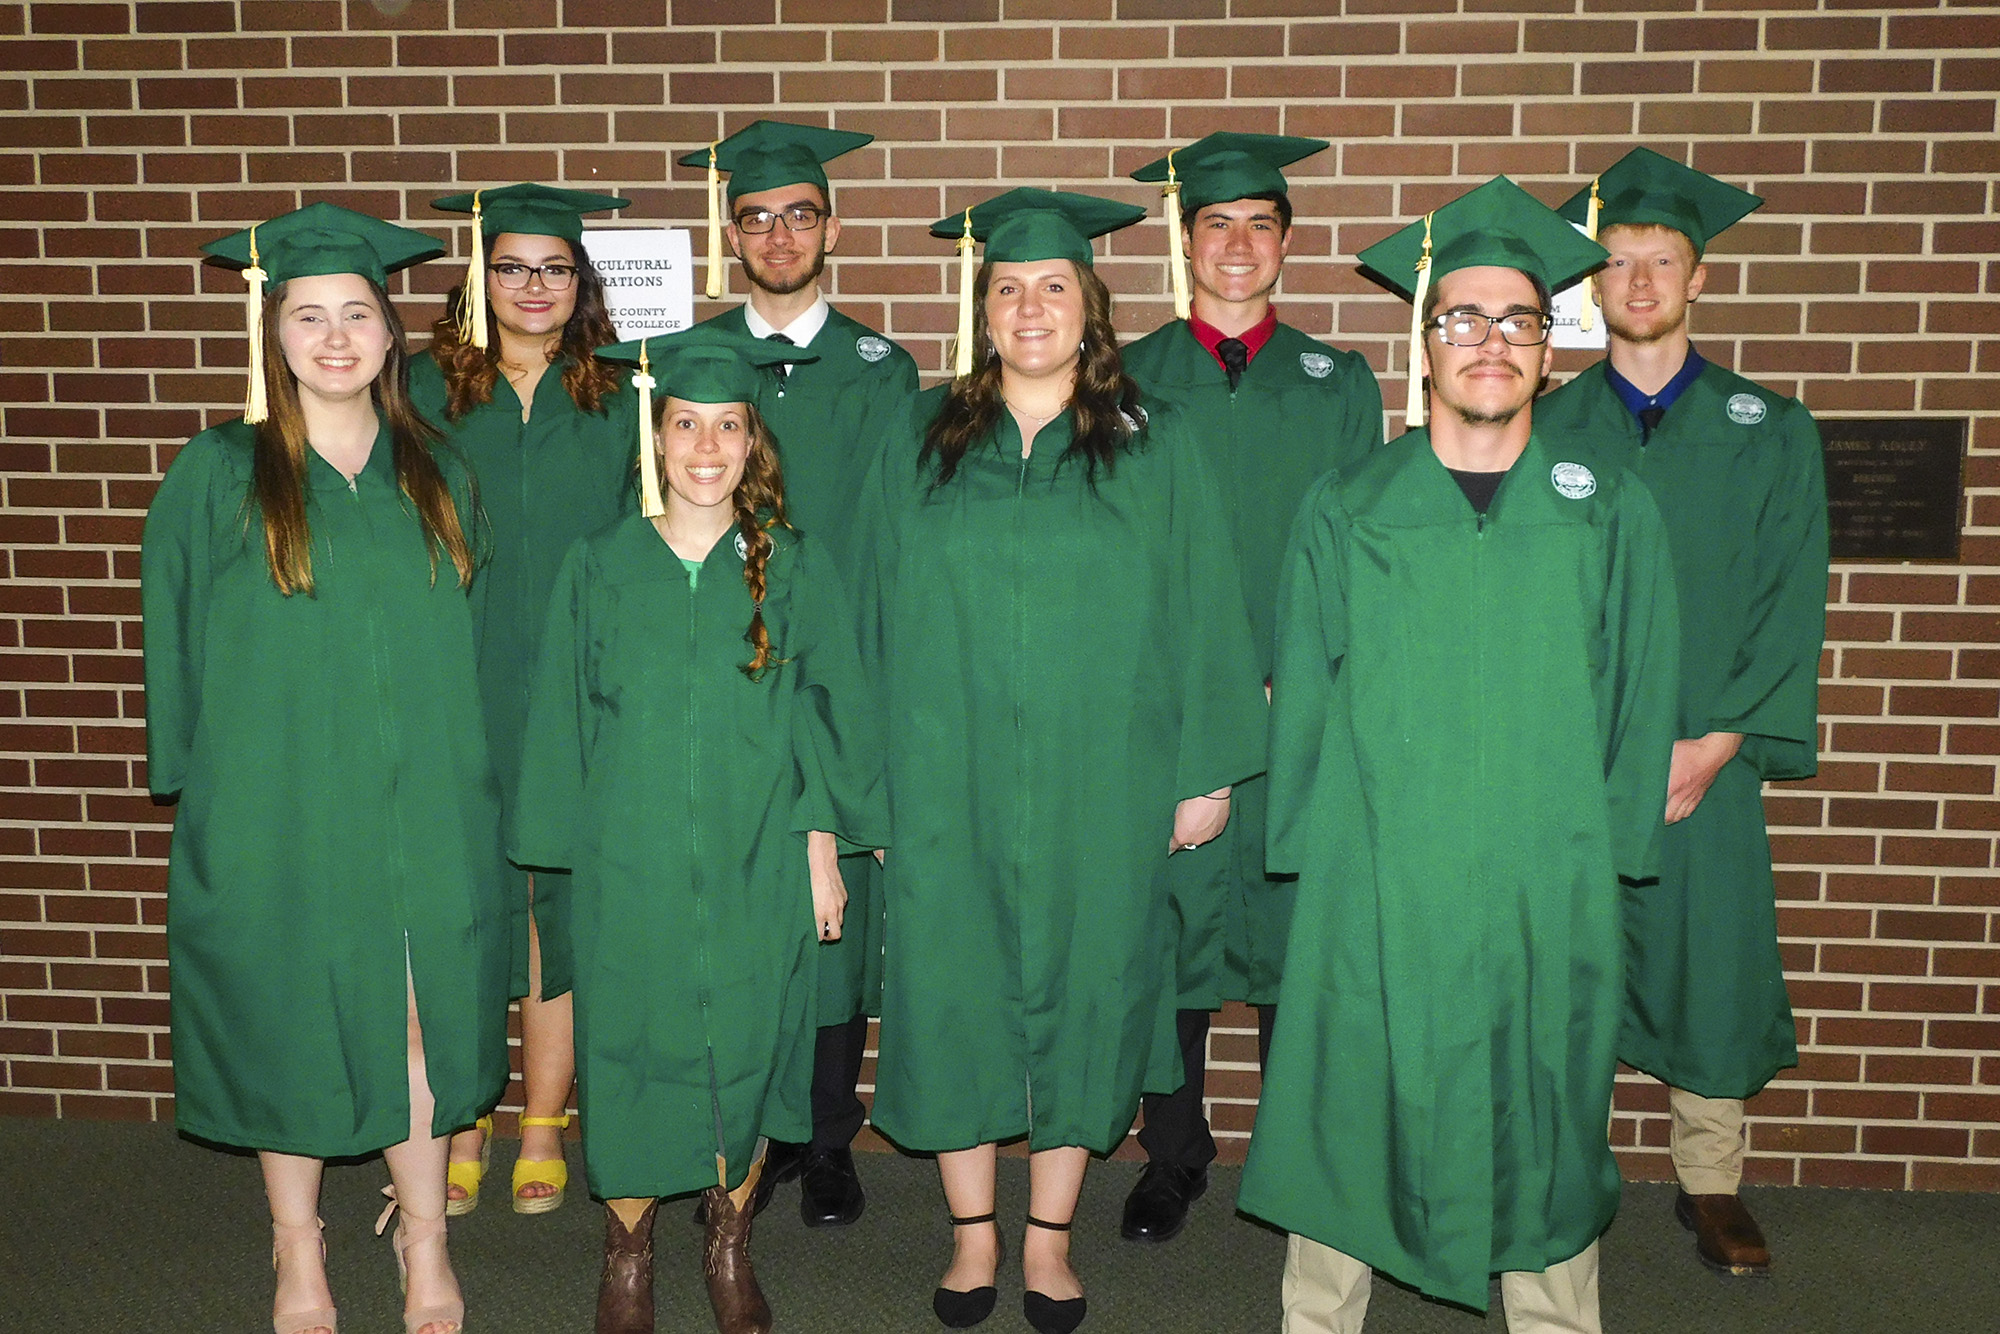 Pictured after their MSU graduation last month are KCC's first Agricultural Operations Program graduates, in the front row, from left to right, Kelsey Harmon, Crystal Raynes, Kaycee Klaren and Benjamin Geibig. In the back row, from left to right, are Breanne Marske, Ean Johnson, Jacob Shilling and Dwight Devenney. Photo courtesy of Kaite Fraser.